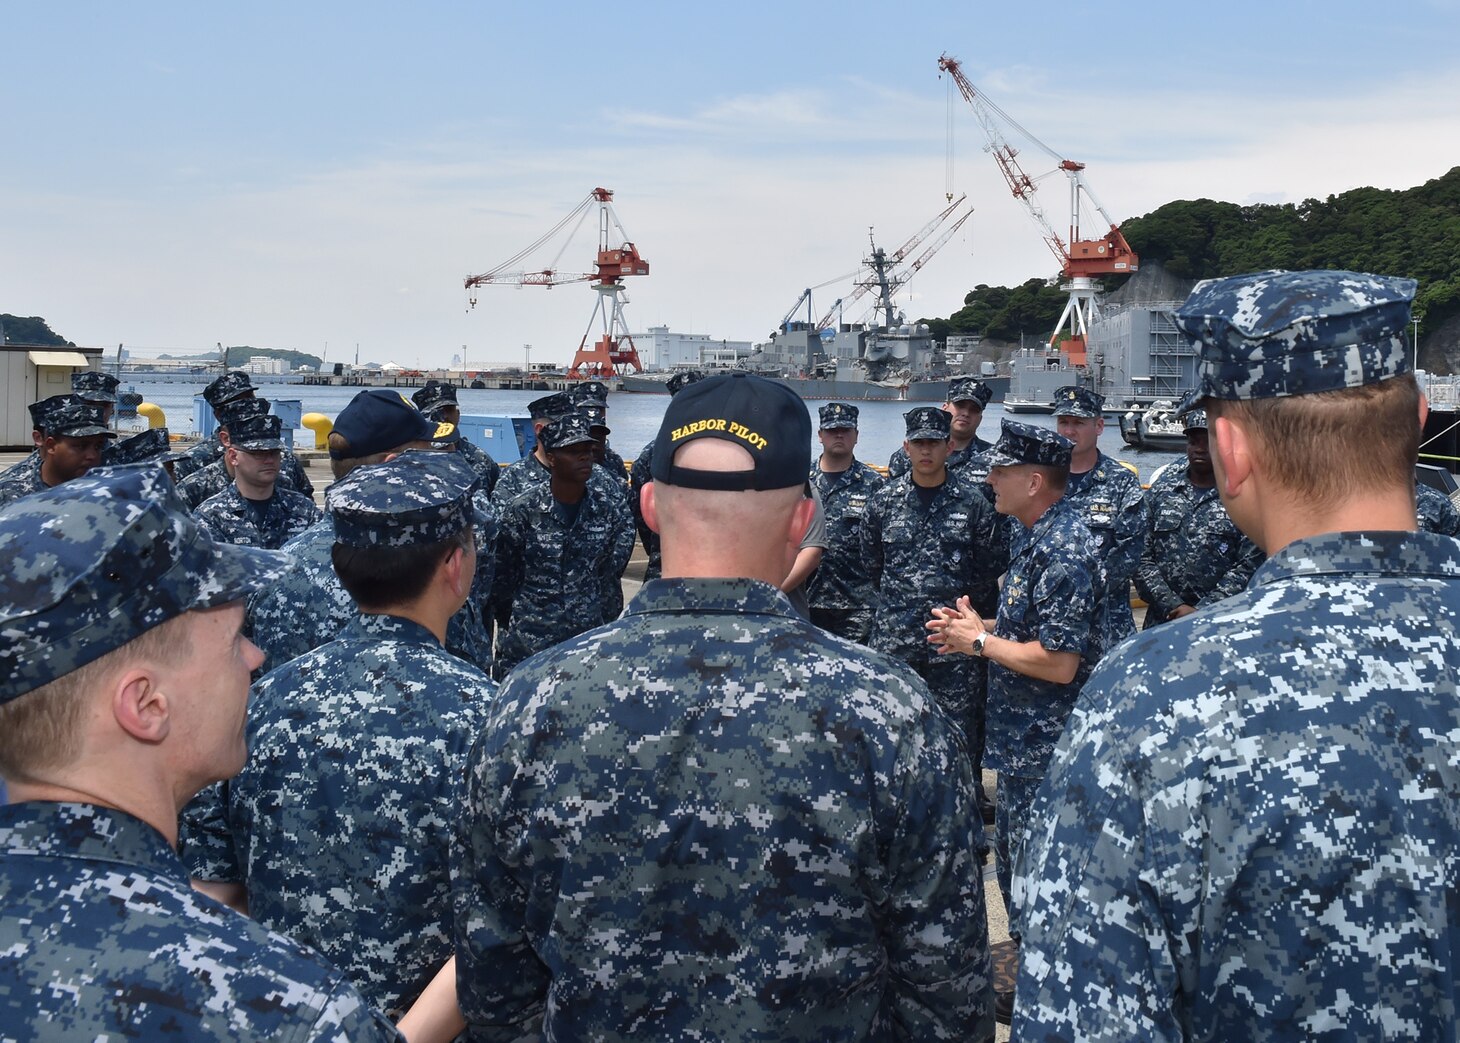 YOKOSUKA, Japan (June 19, 2017) Rear Adm. Greg Fenton, commander of Naval Forces Japan/Navy Region Japan, thanks the crew of the Navy Tug Seminole (YT 805) for their work in helping bring the guided-missile destroyer USS Fitzgerald (DDG 62) back to Fleet Activities Yokosuka after a collision with a merchant vessel June 17, 2017. The incident is under investigation. (U.S. Navy photo by Mass Communication Specialist 2nd Class Richard L.J. Gourley/Released)